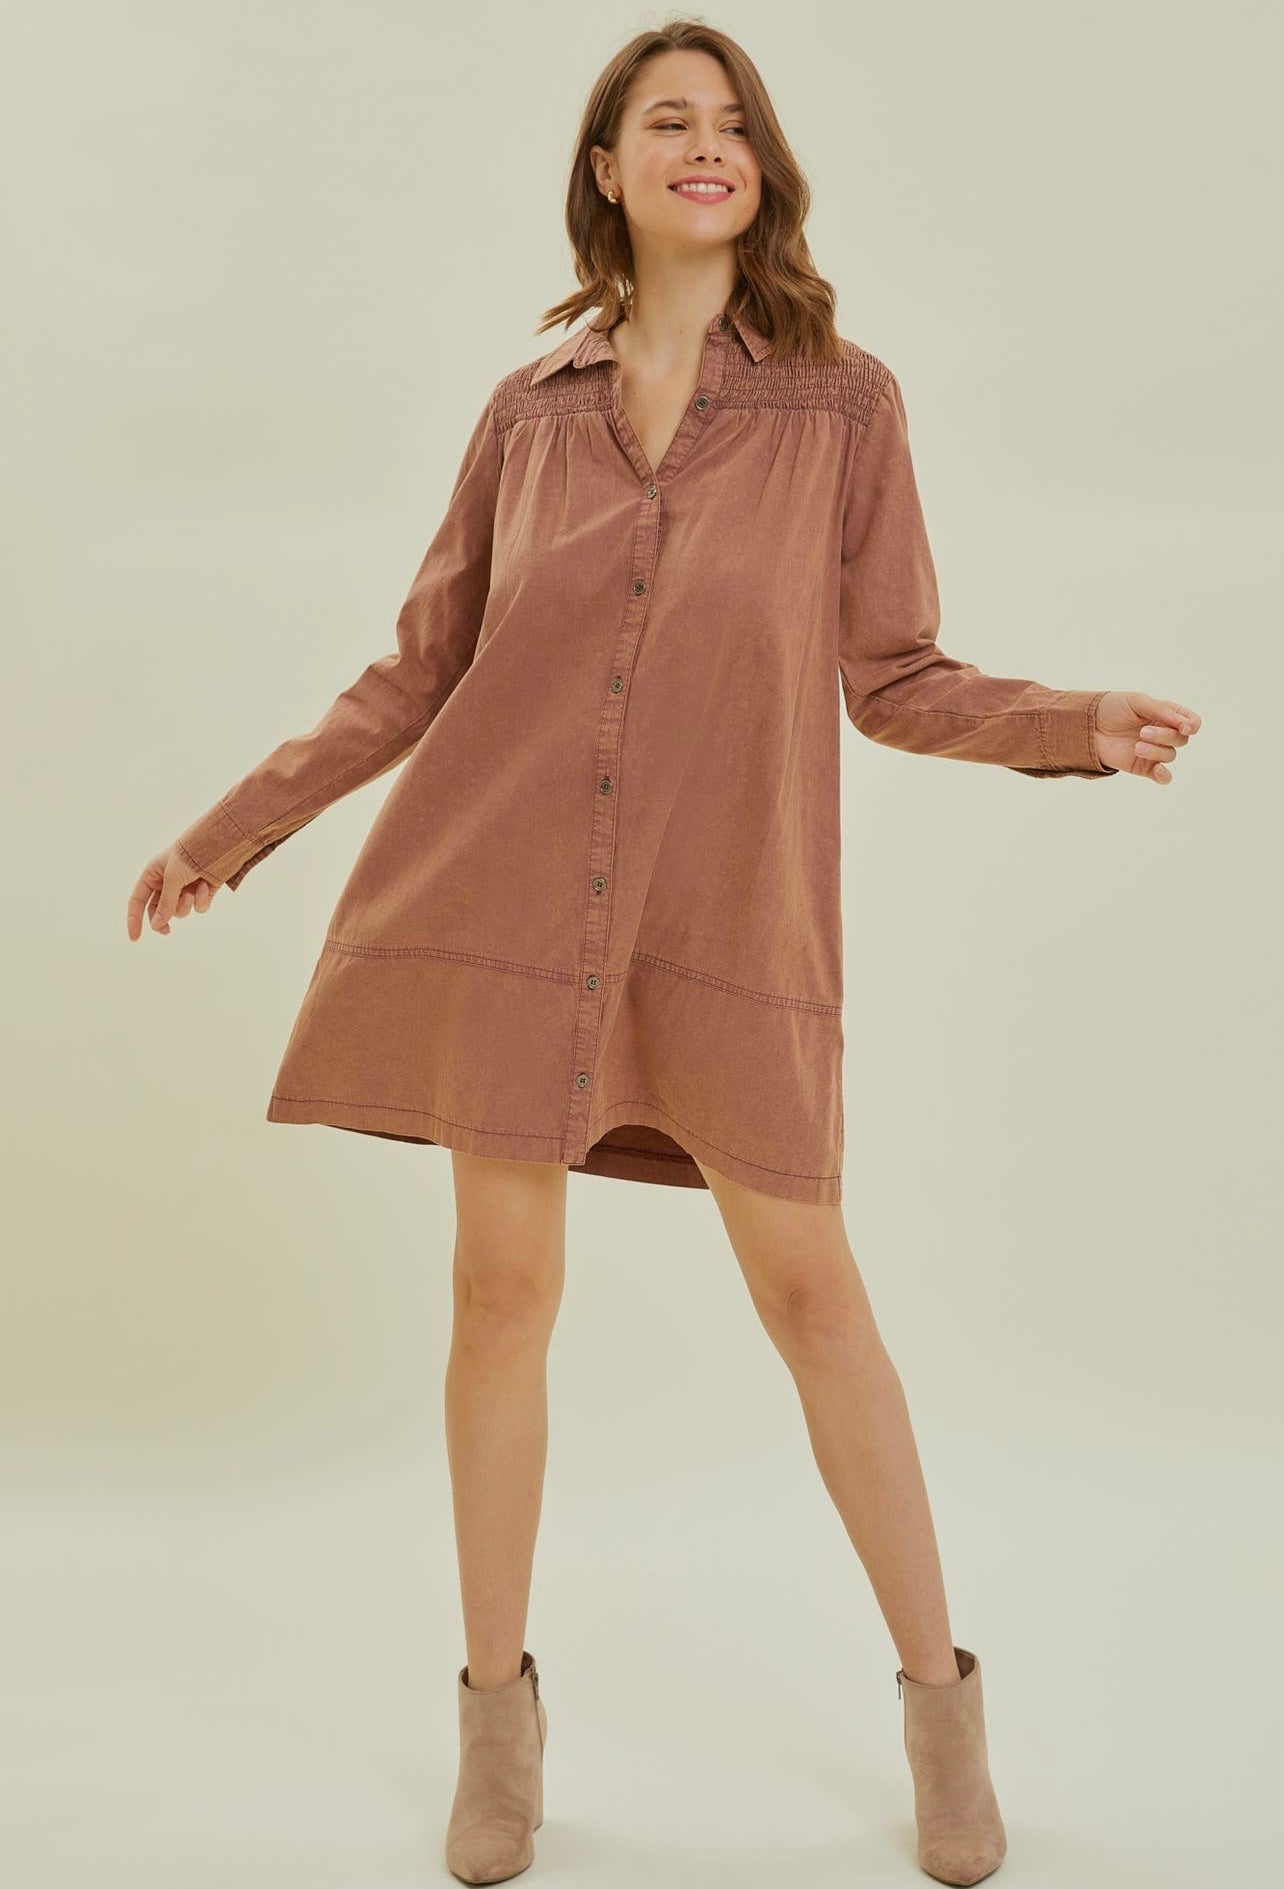 Mineral washed button up dress